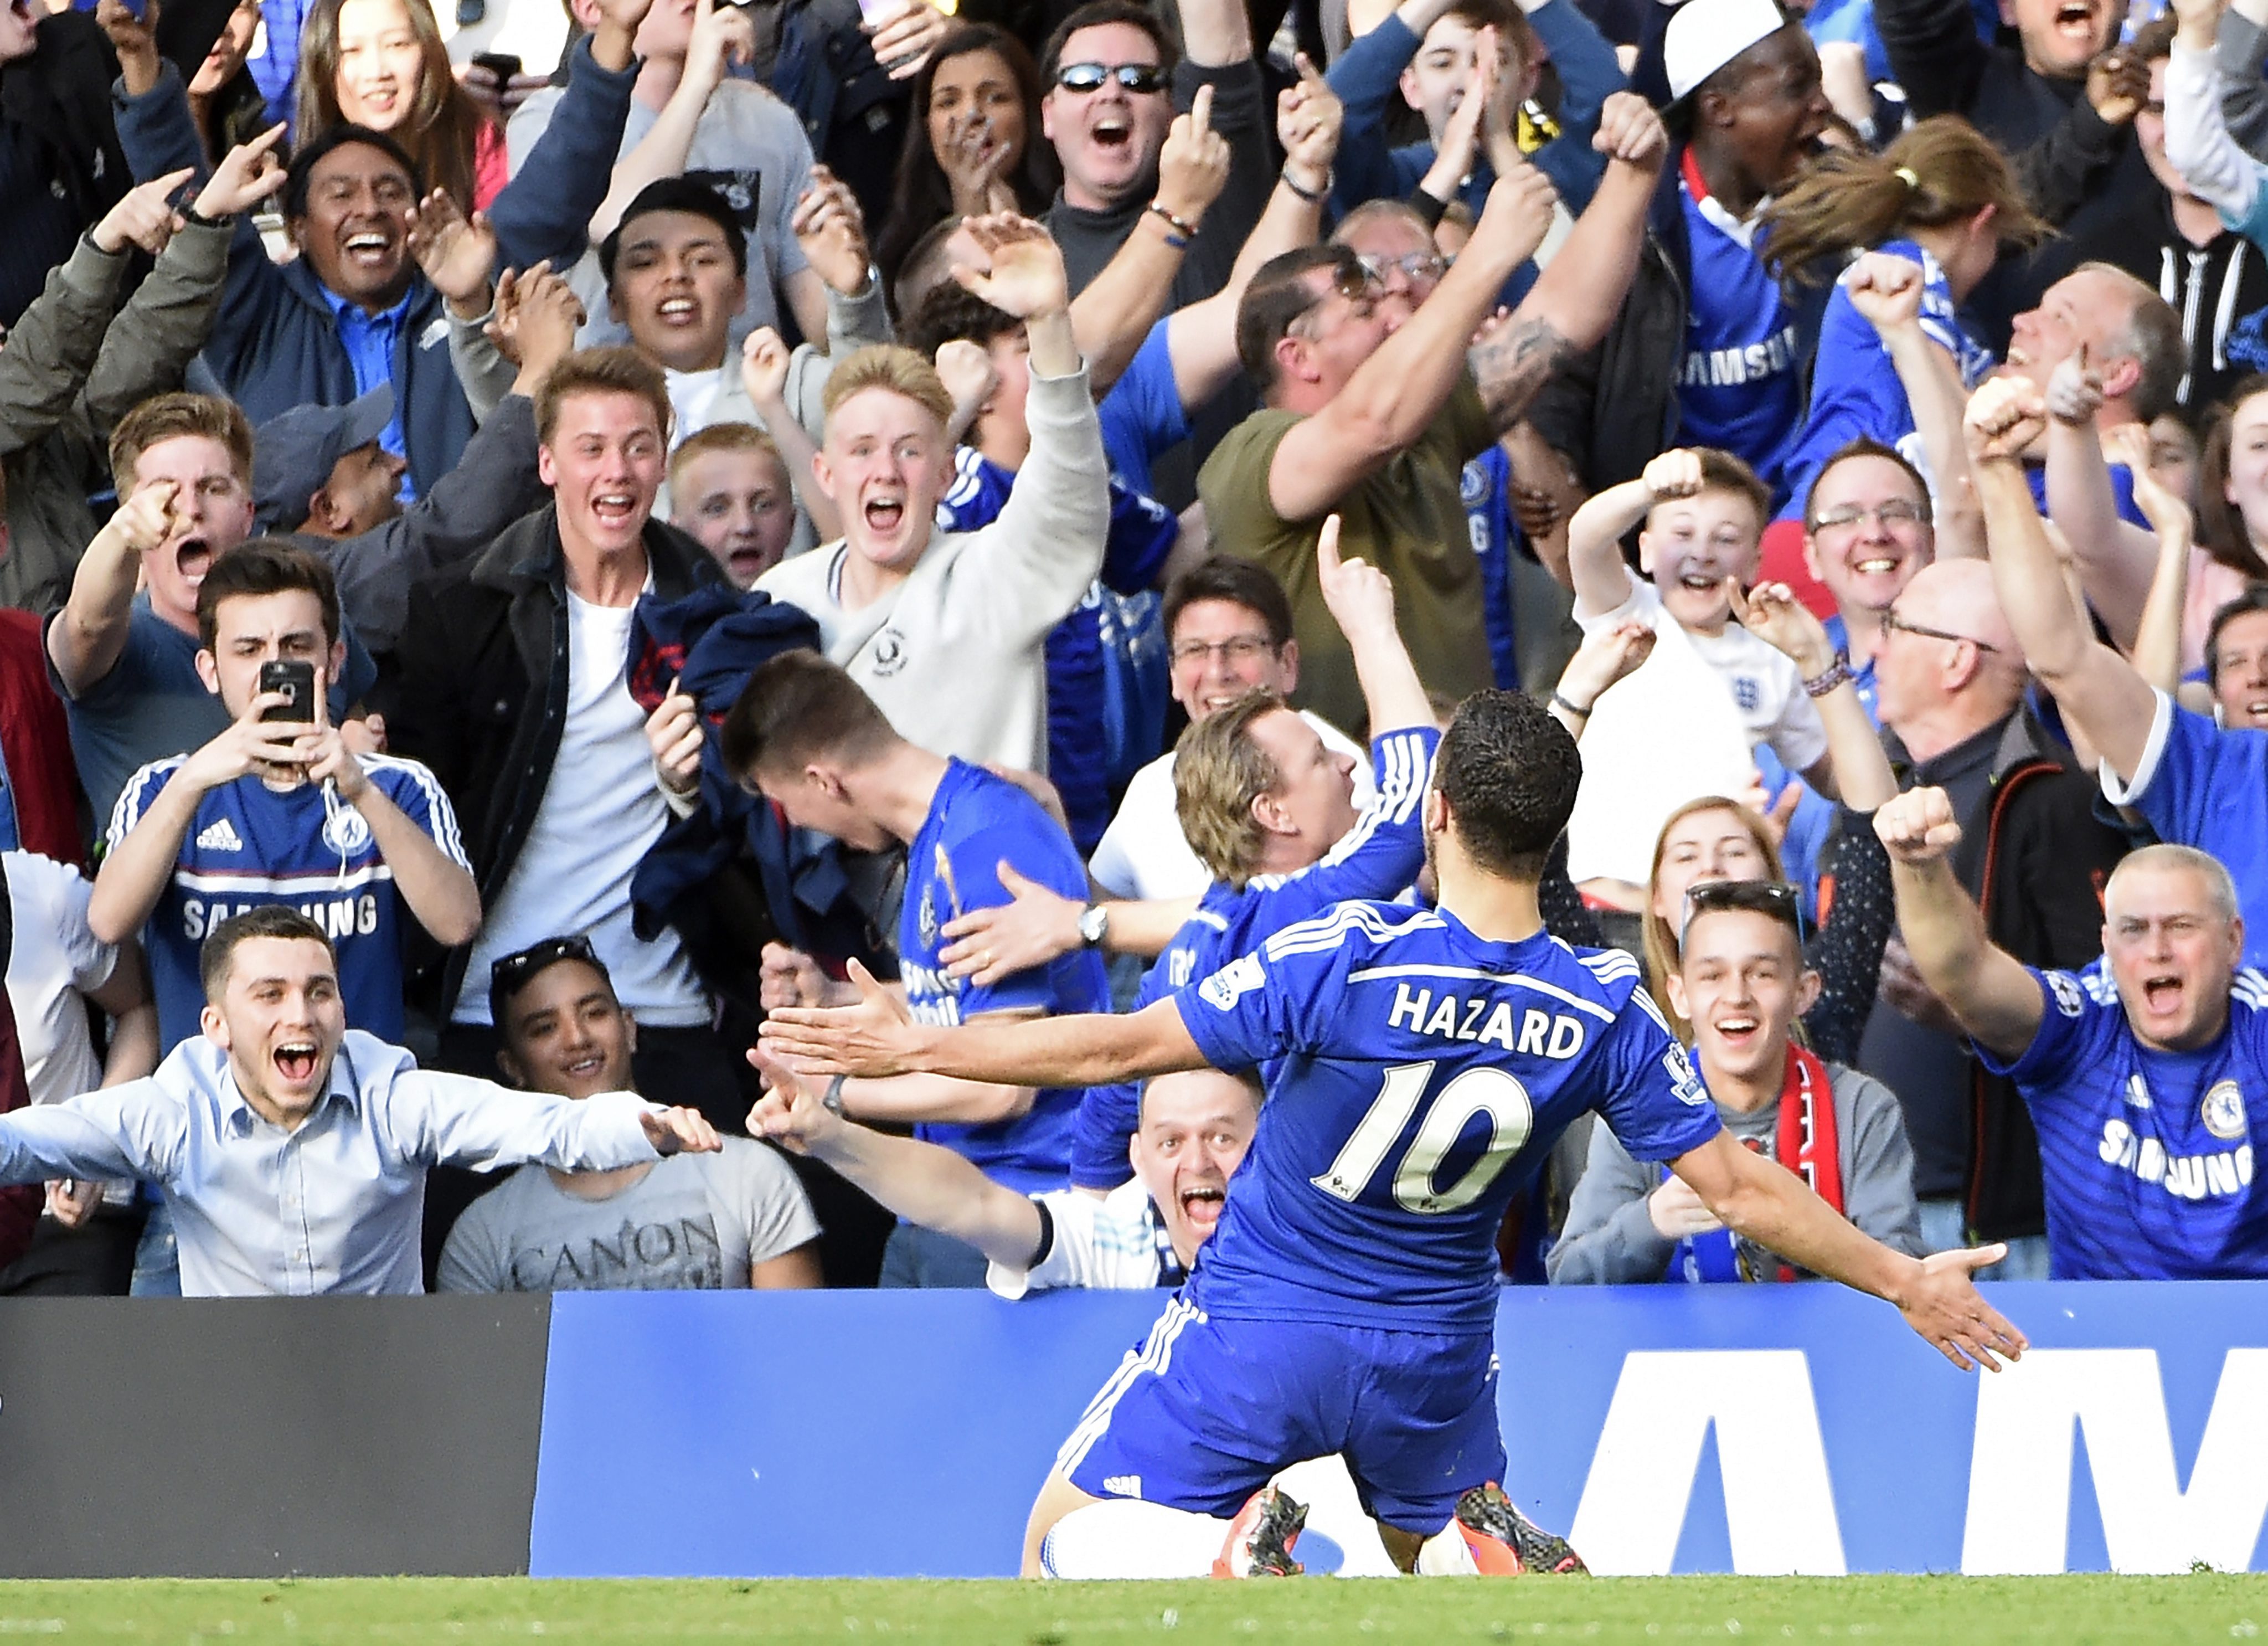 epa04710680 Chelsea's Eden Hazard celebrates after scoring the 1-0 goal during the English Premier League soccer match between Chelsea and Manchester United at Stamford Bridge stadium in London, Britain, 18 April 2015.  EPA/FACUNDO ARRIZABALAGA DataCo terms and conditions apply http//www.epa.eu/downloads/DataCo-TCs.pdf